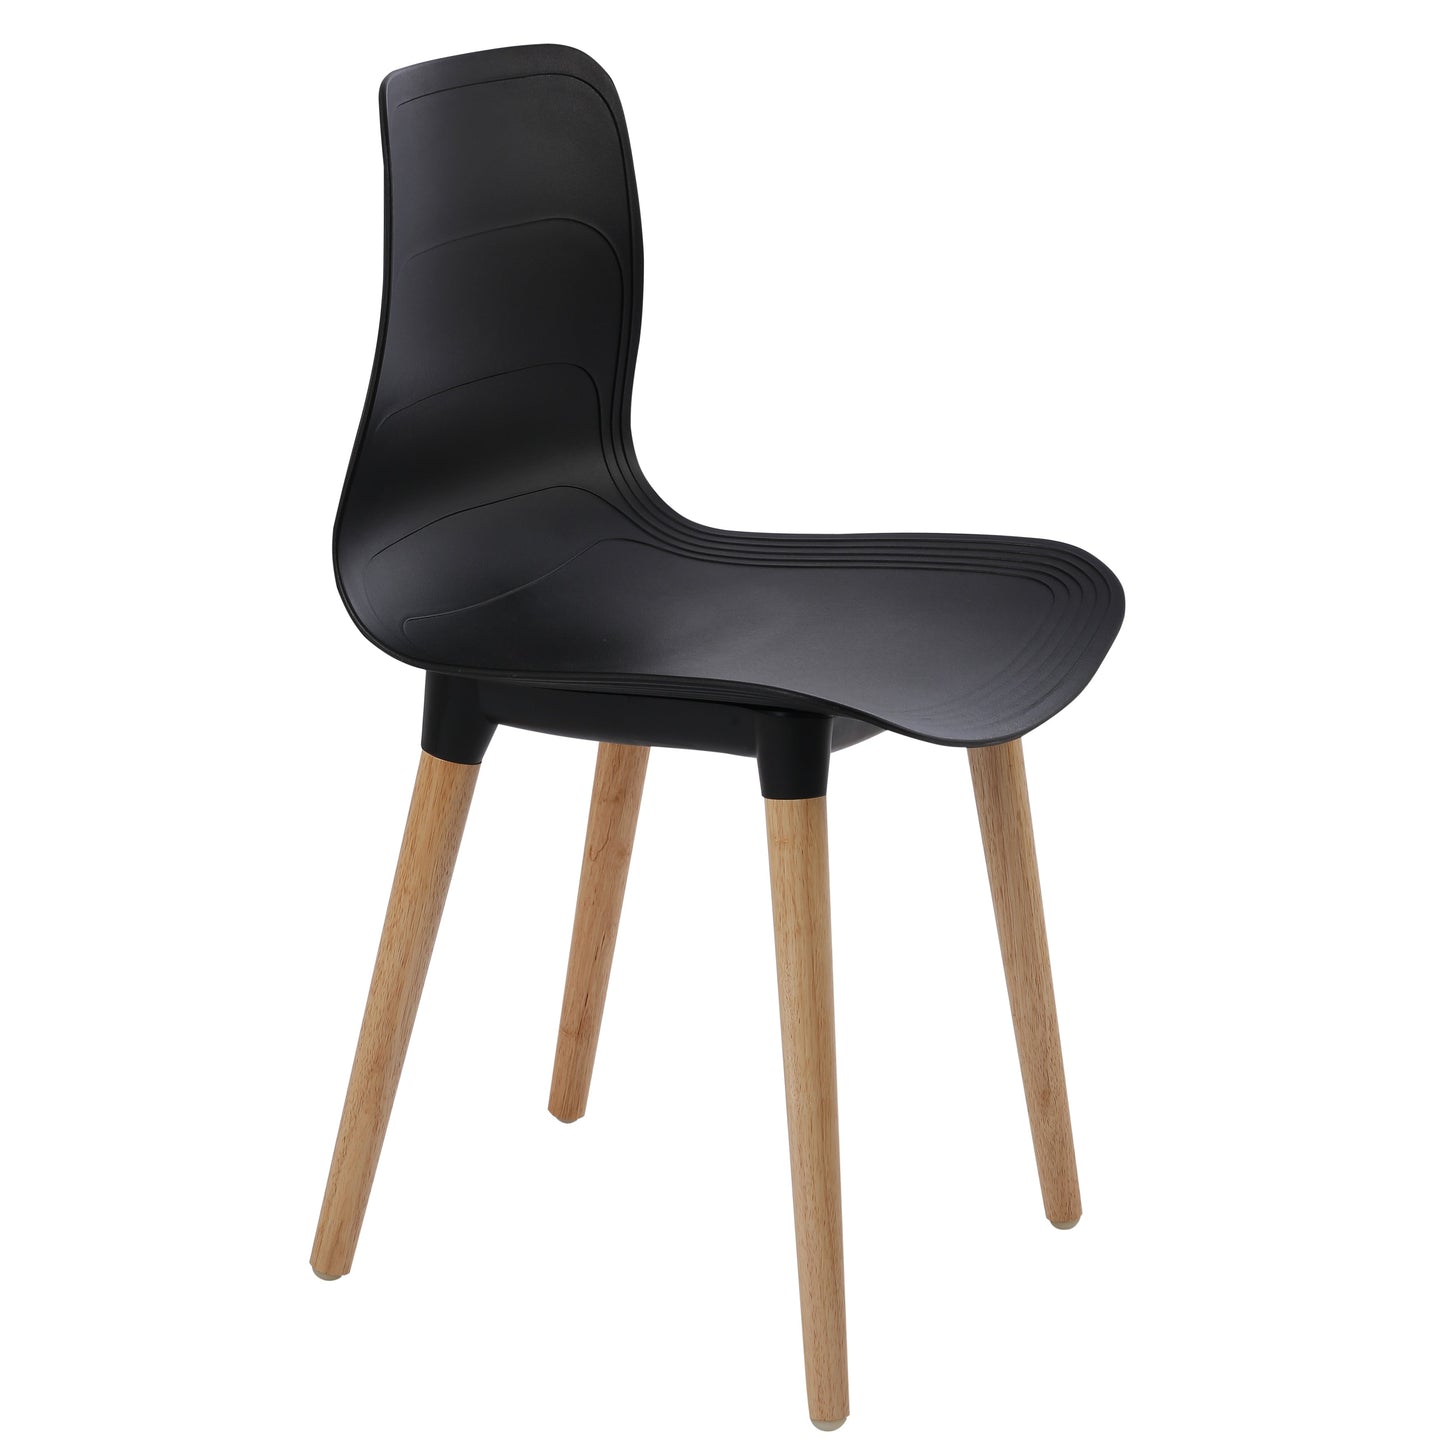 Plastic Chairs With Wood Legs For Cafe and Dining HIFUWA-G (Black)